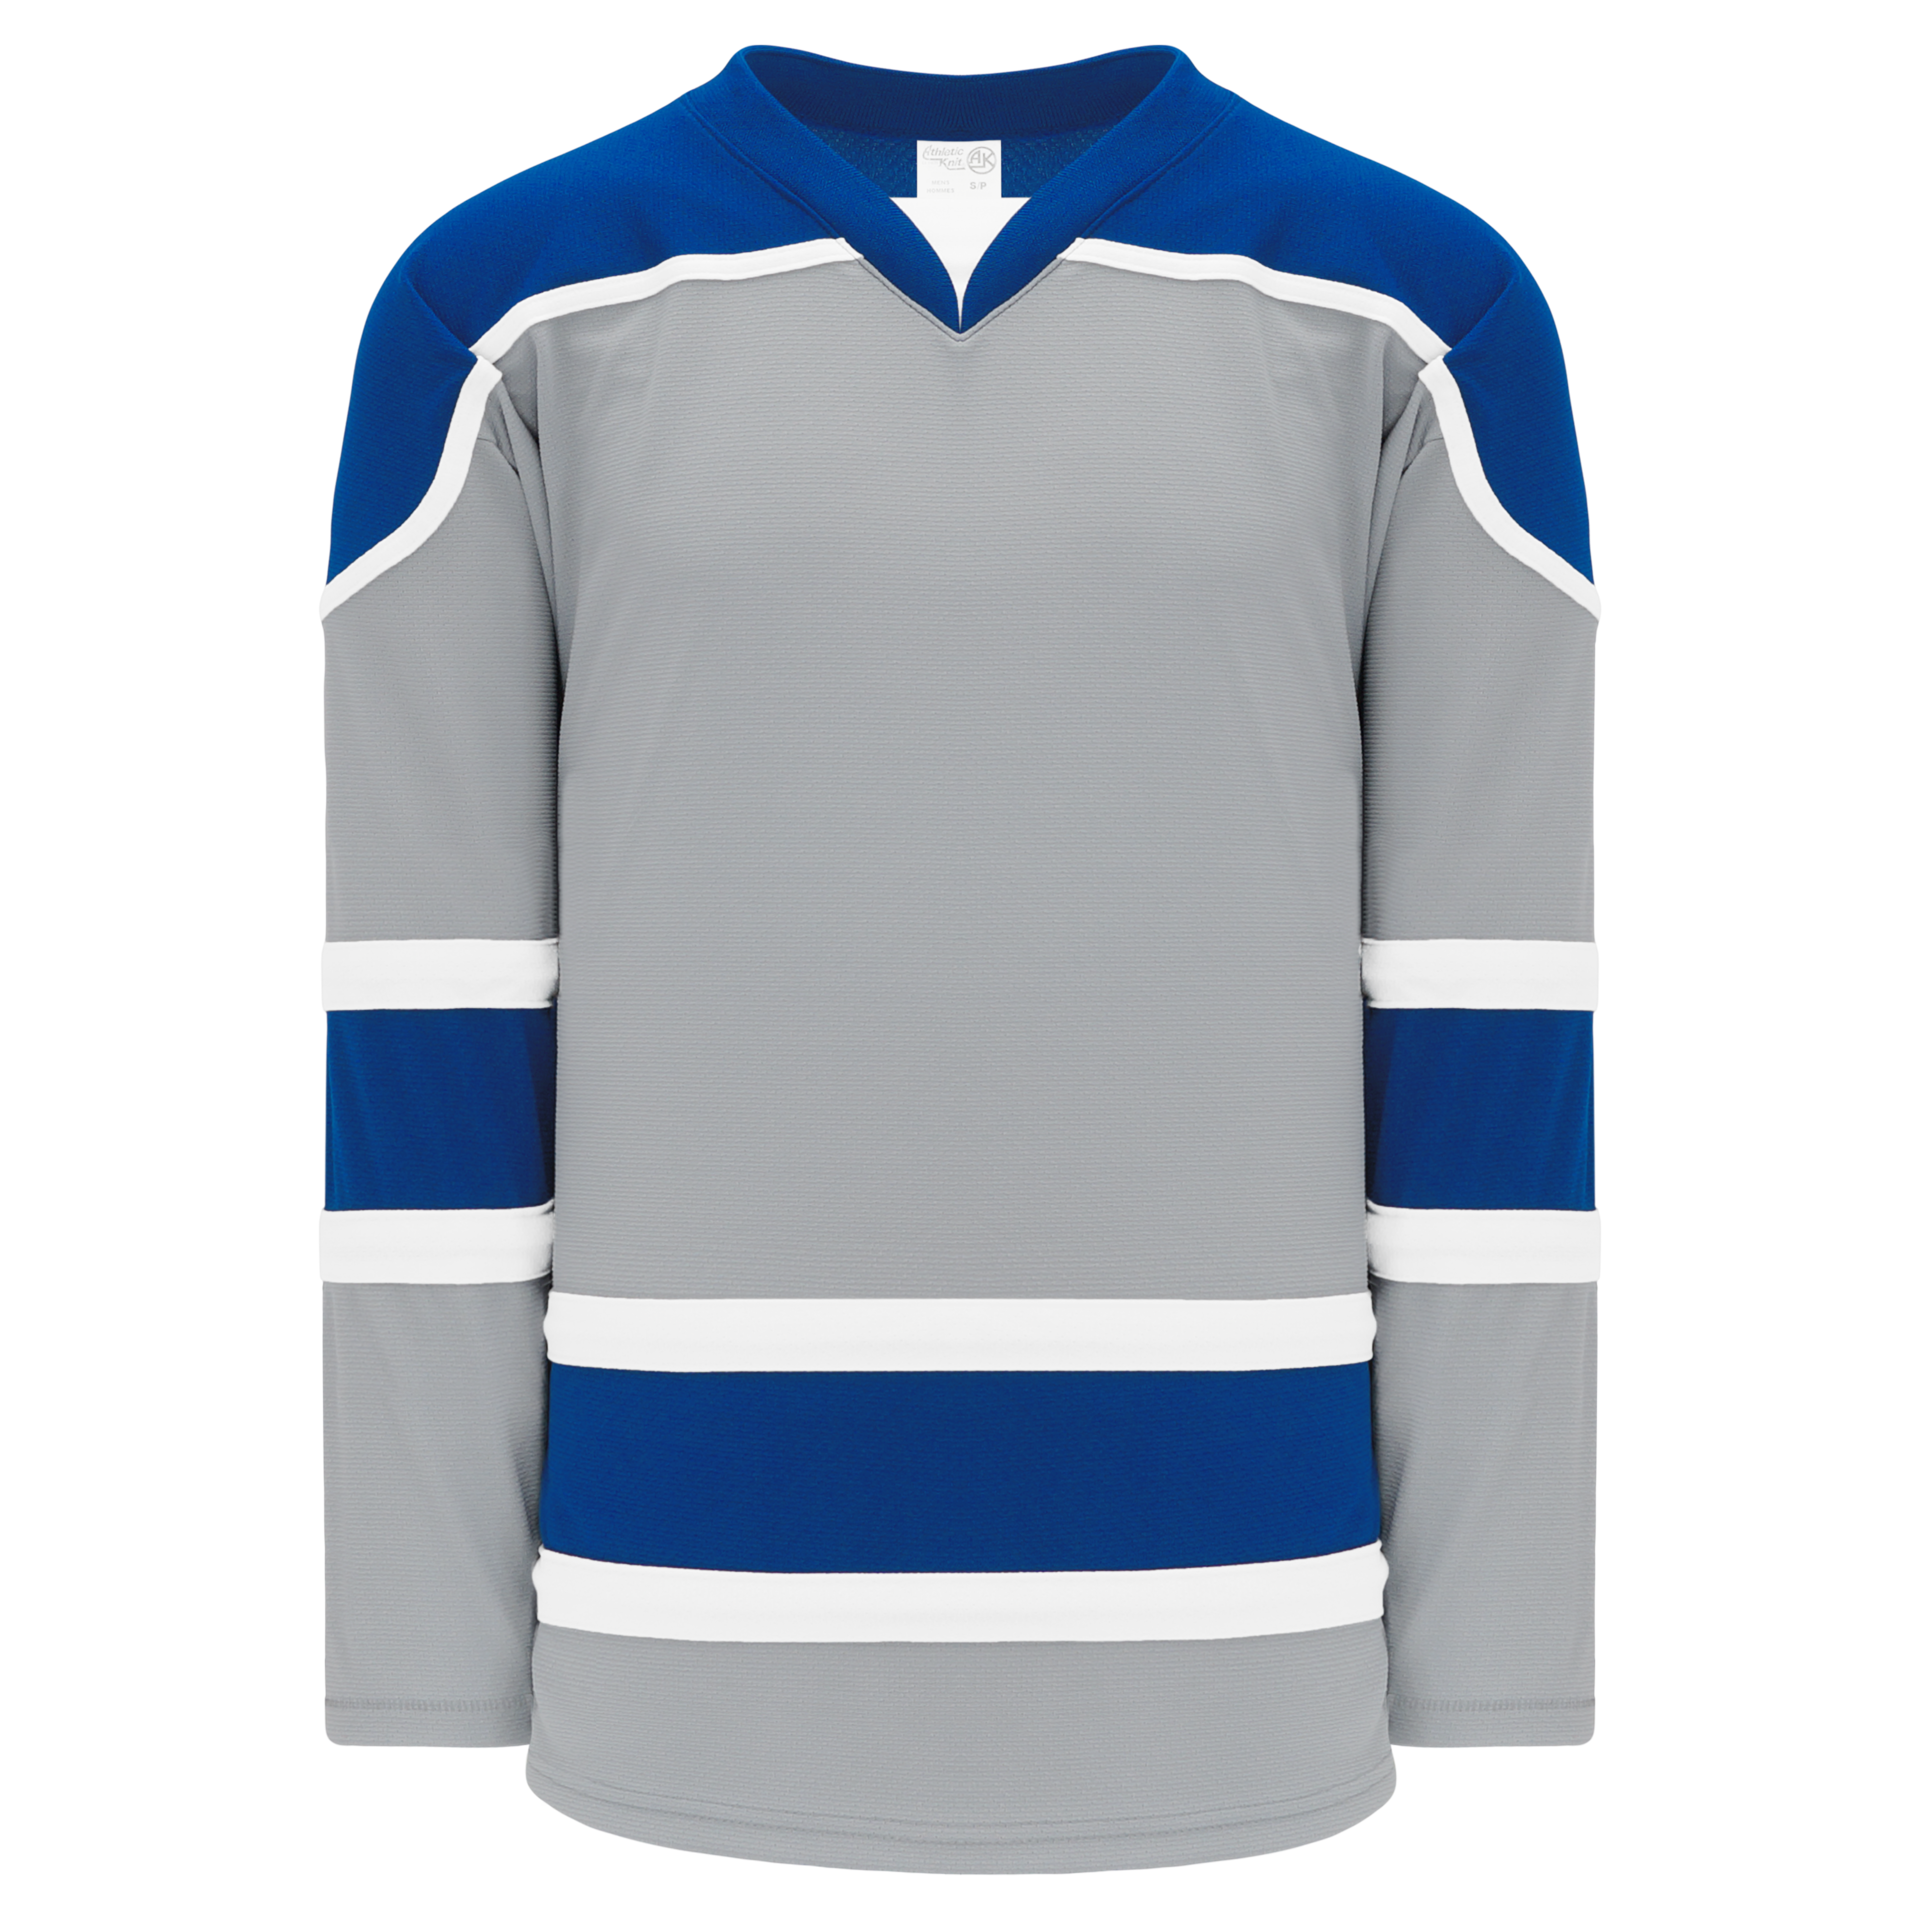 Athletic Knit - MLB VS NHL JERSEY SWAP Representing our Toronto Teams 🏒 ⚾  OK! Blue Jays! Let's. Play. Hockey?!? Welcoming the Blue Jays home, here's  a look at what a Toronto